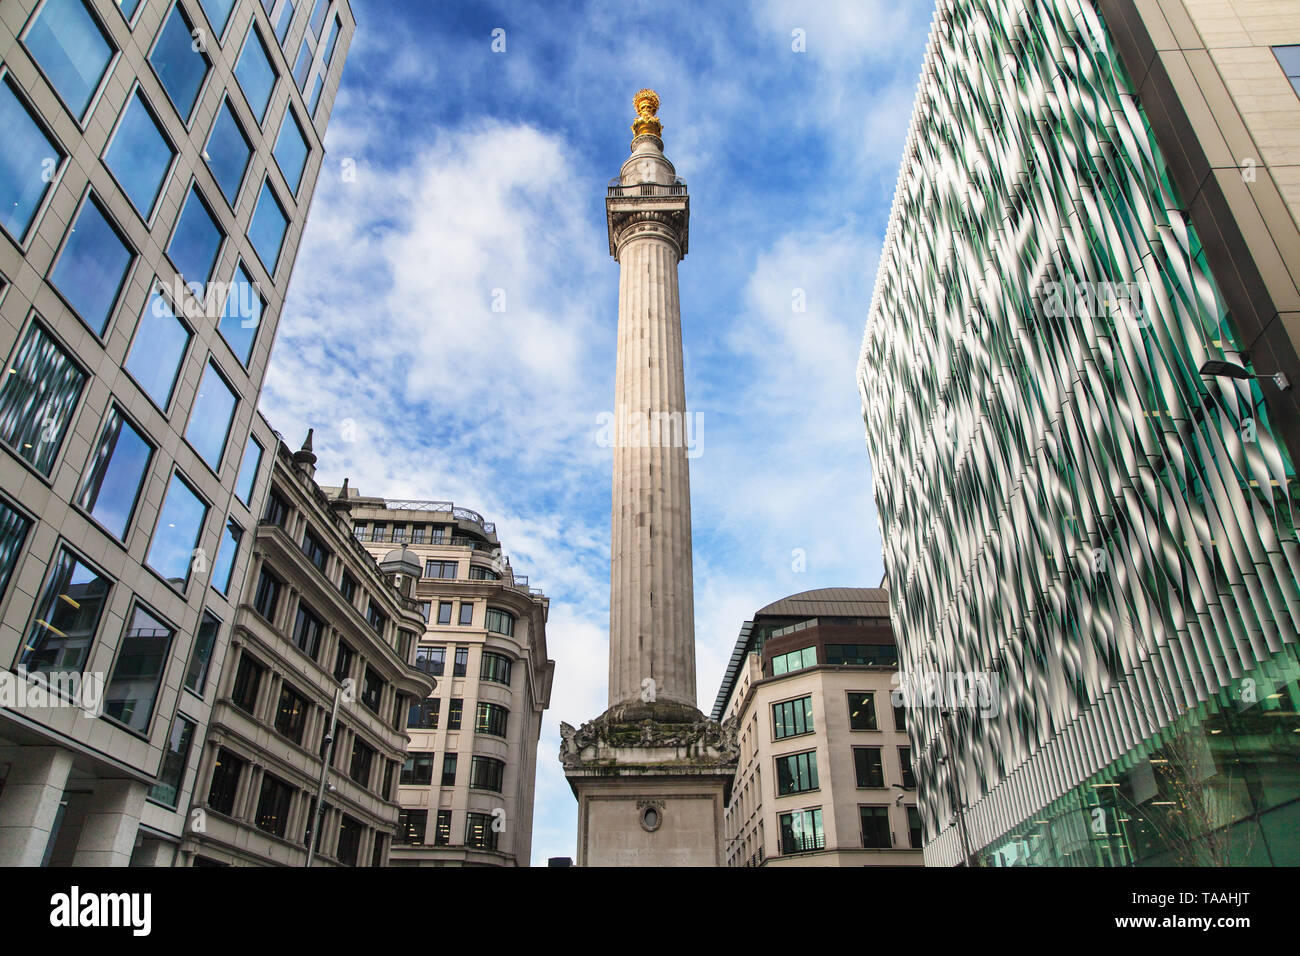 The Monument to the Great Fire of London, United Kingdom. Stock Photo